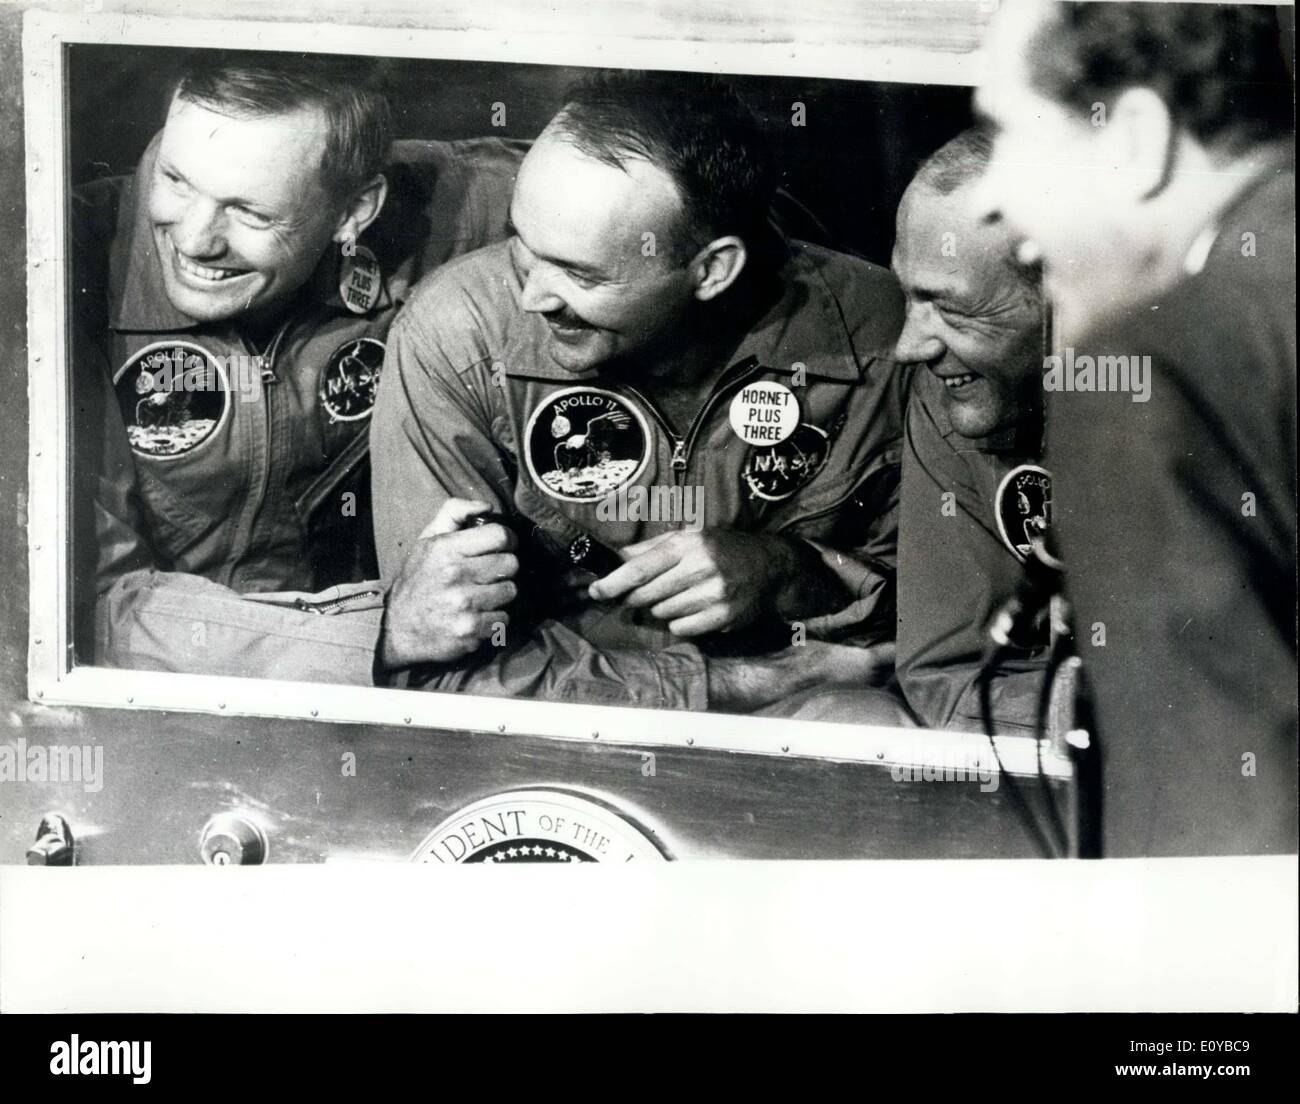 Jul. 29, 1969 - Apollo 11 Splashdown: Though separated by a window of the Mobile Quarantine Facility., president Richard M. Nixon and Apollo 11 astronauts (L to R), Noil Armstrong, Michael cellins and Edwin Aldria share a laugh following splashdown and recovery in the pacific ocean on July 24th 1969. The president greeted the space pilots aboard the USS Mornet, the prime recovery ship, shortly after their splashdown Stock Photo